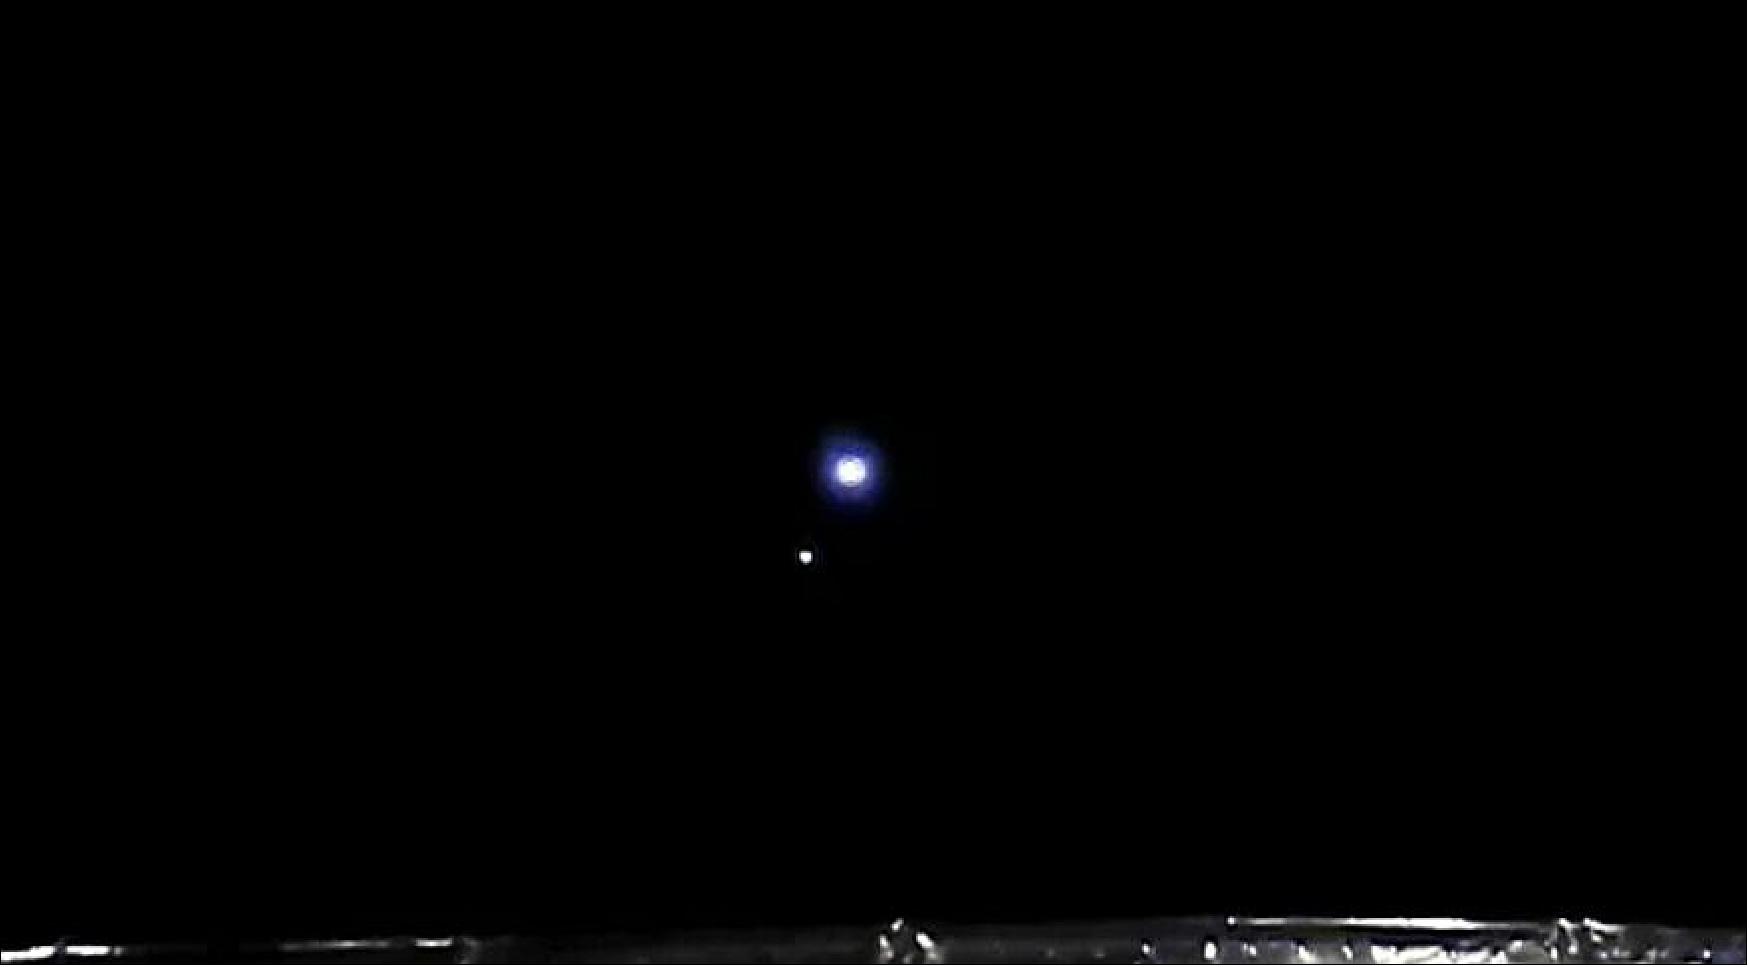 Figure 12: The Earth and moon viewed by Chang'e 5 from Sun-Earth Lagrange point 1 in April 2021, before returning to the Earth-moon system (image credit: CNSA/CLEP)